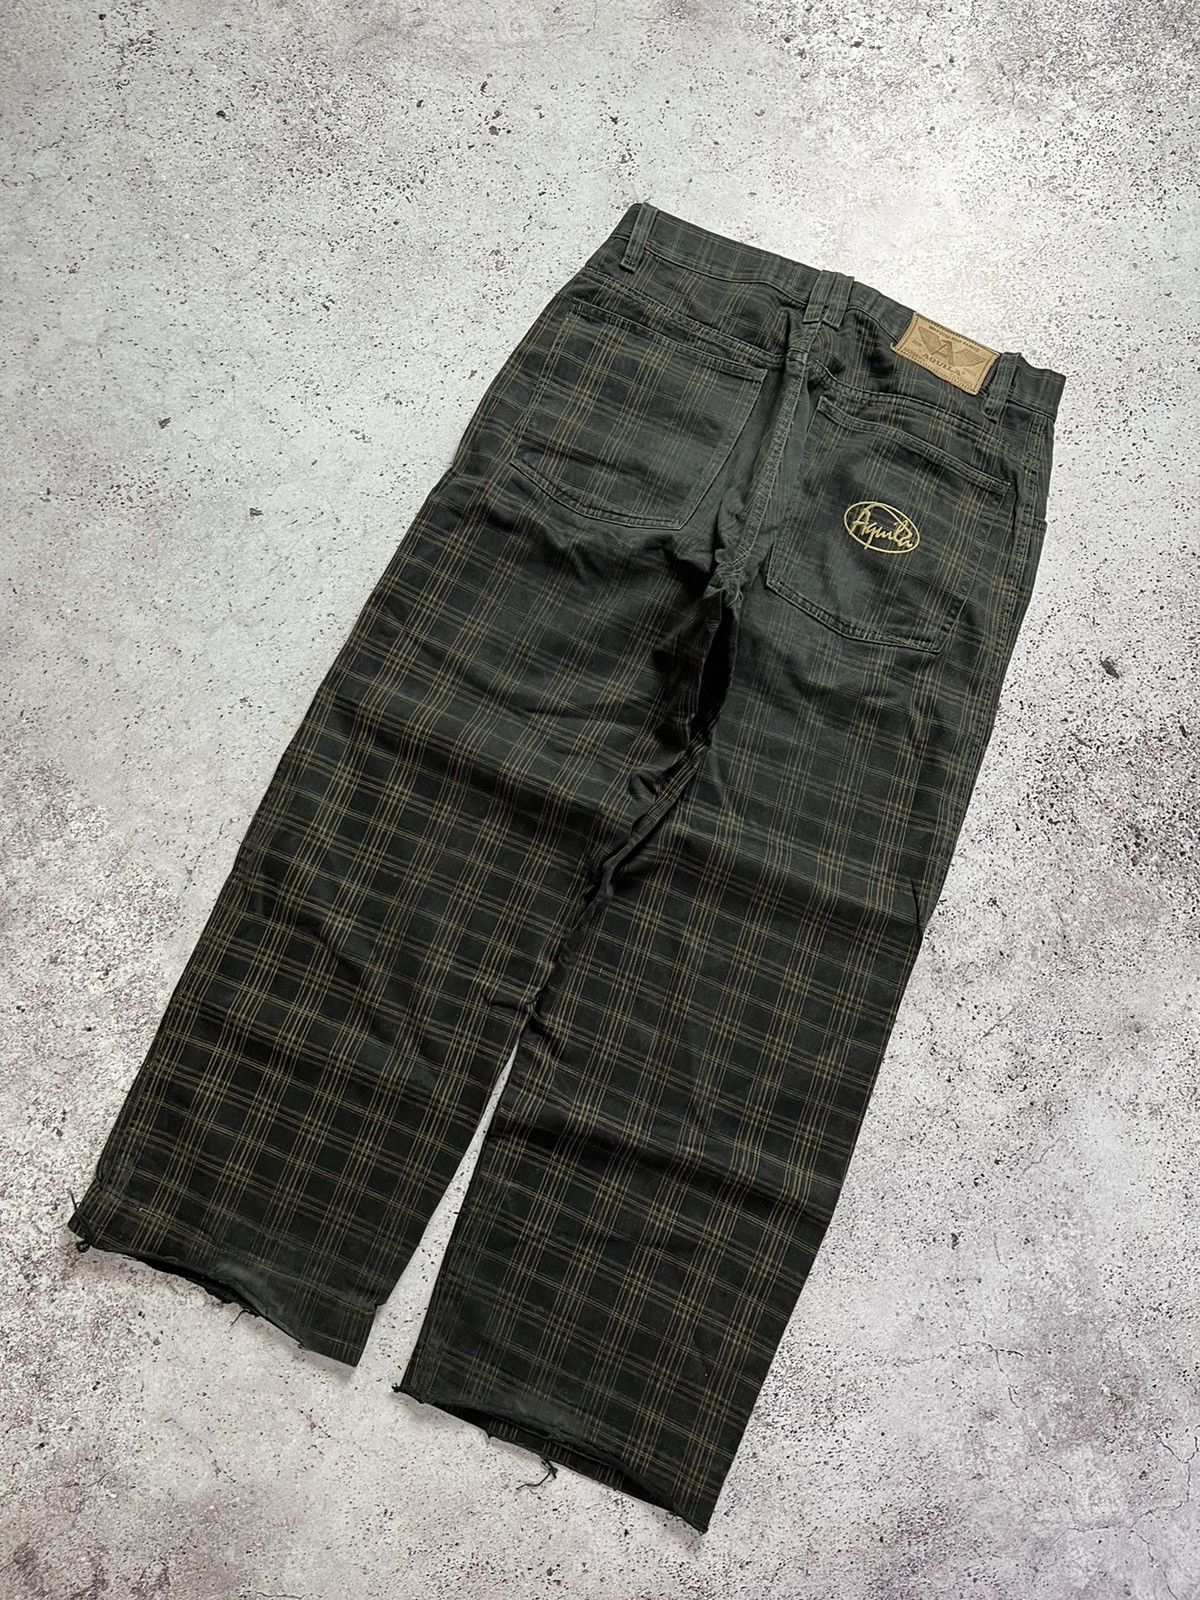 Pre-owned Distressed Denim X Jnco Vintage Aquila Jeans Parachutes Denim Jnco Style In Brown